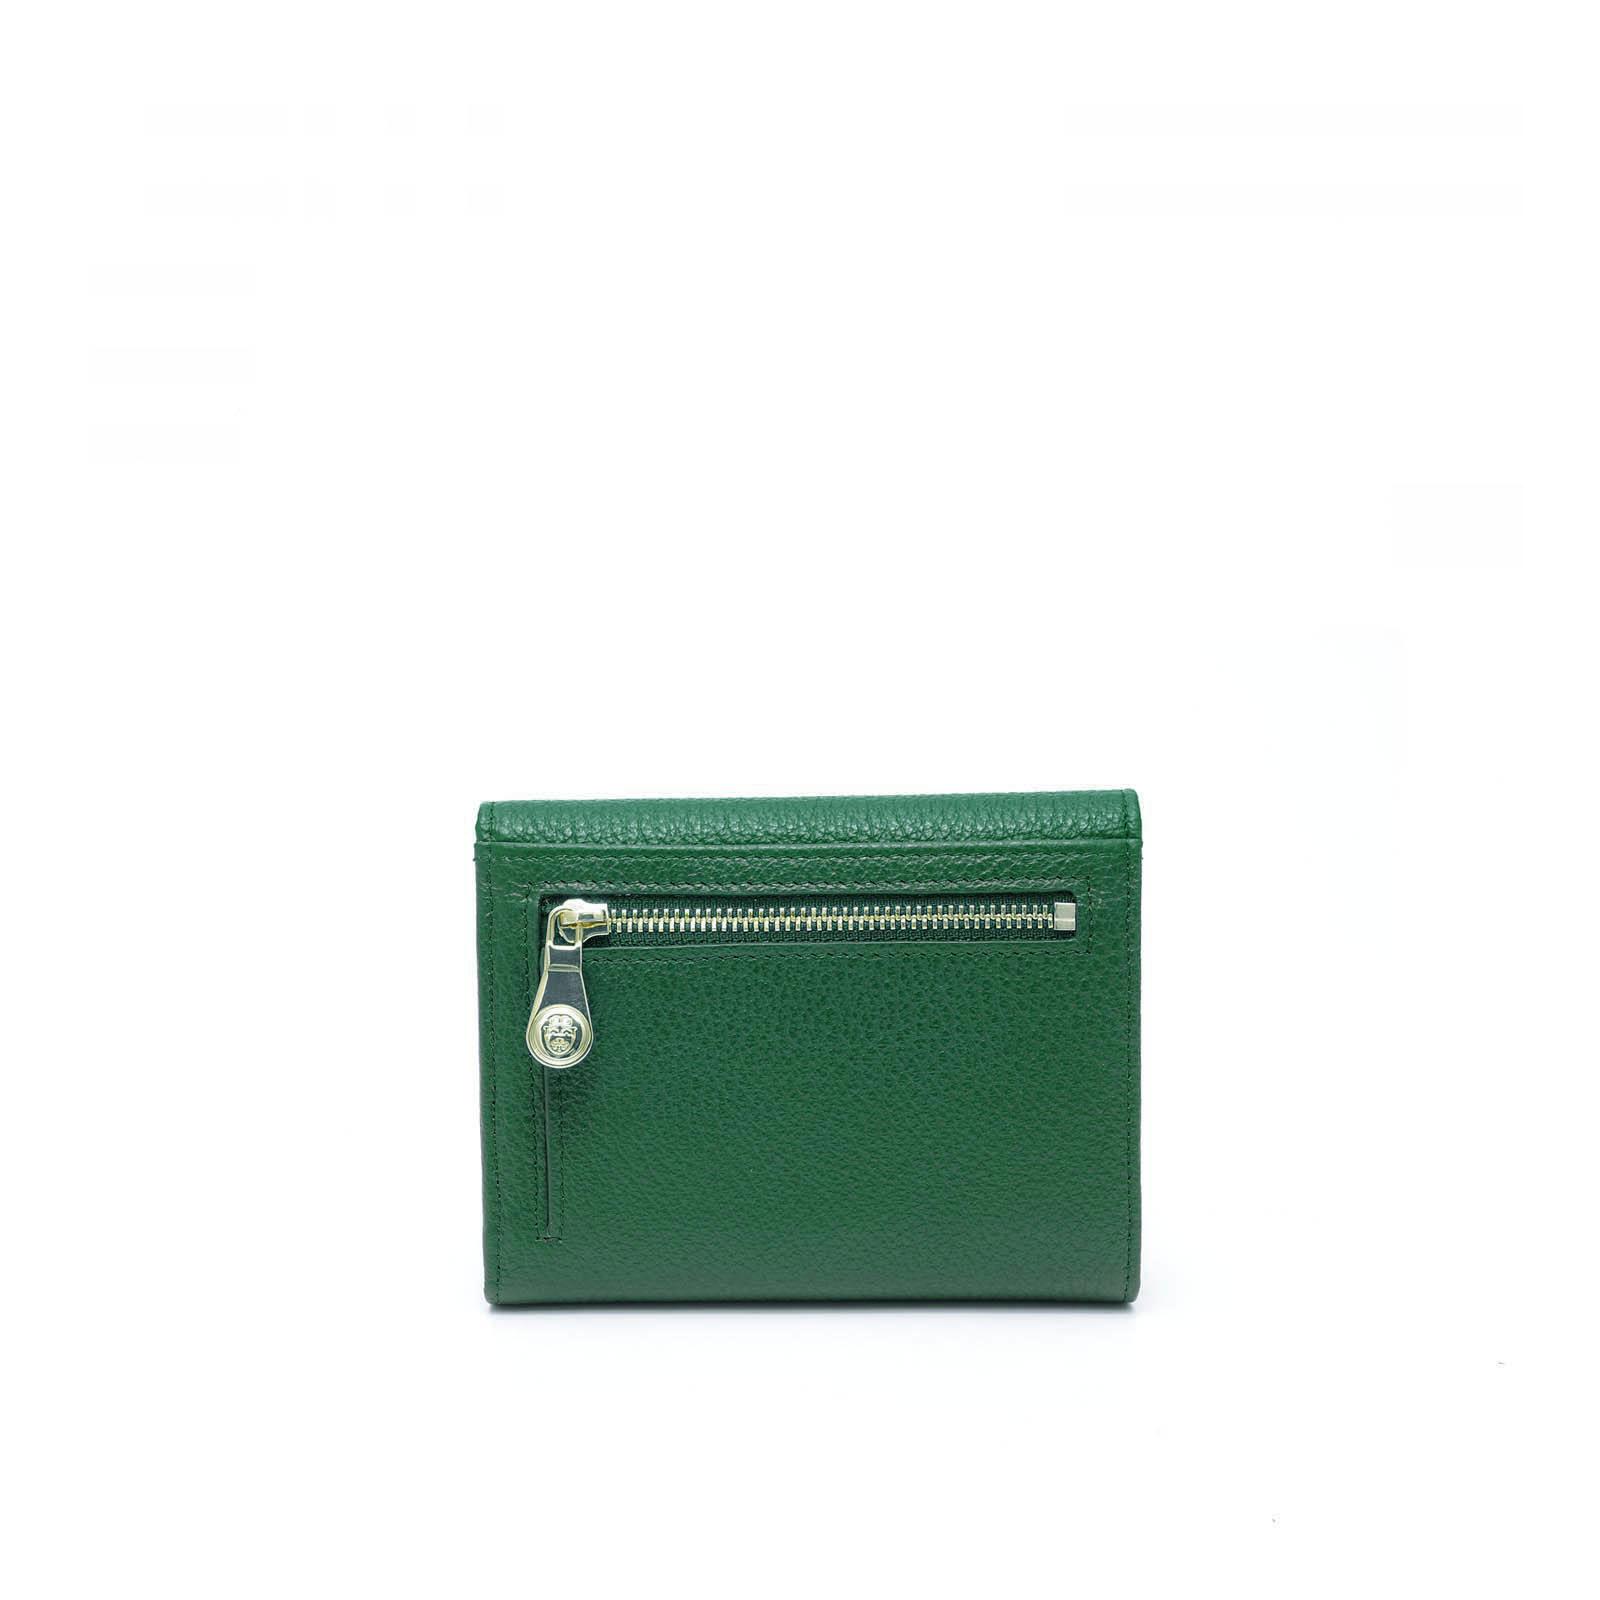 Portefeuille Femmes Small Continental Tiffany Vert 